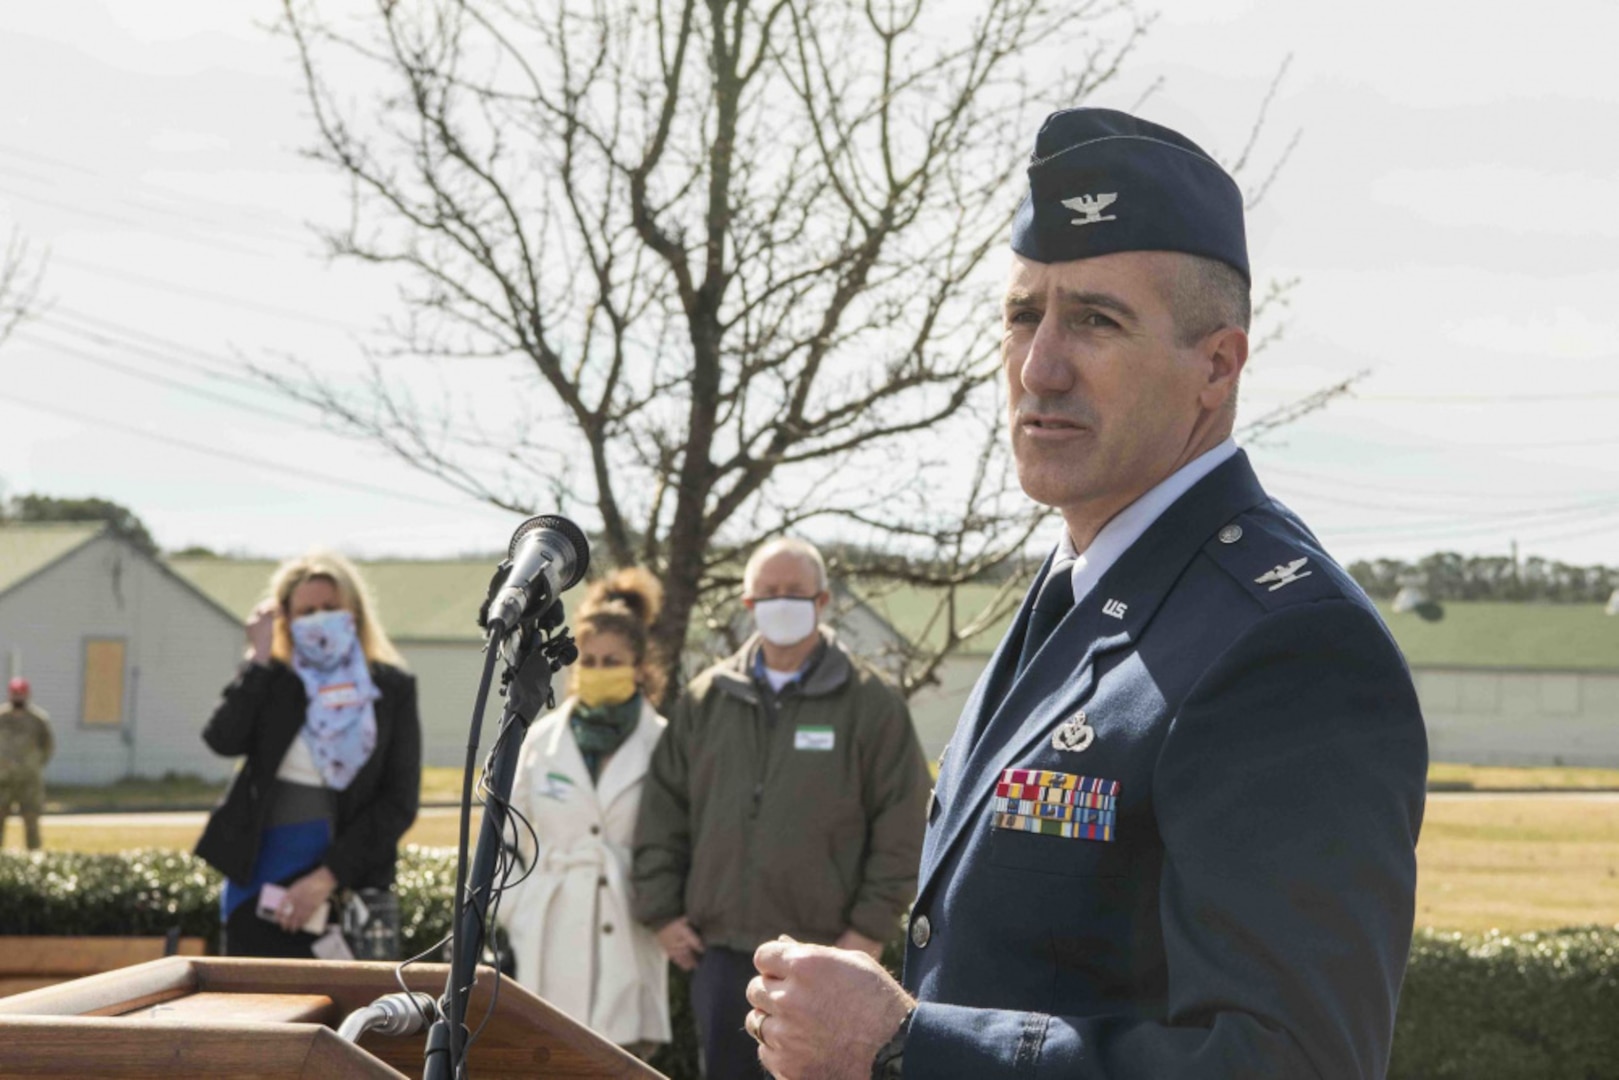 A U.S. Air Force colonel speaks to a crowd at the podium